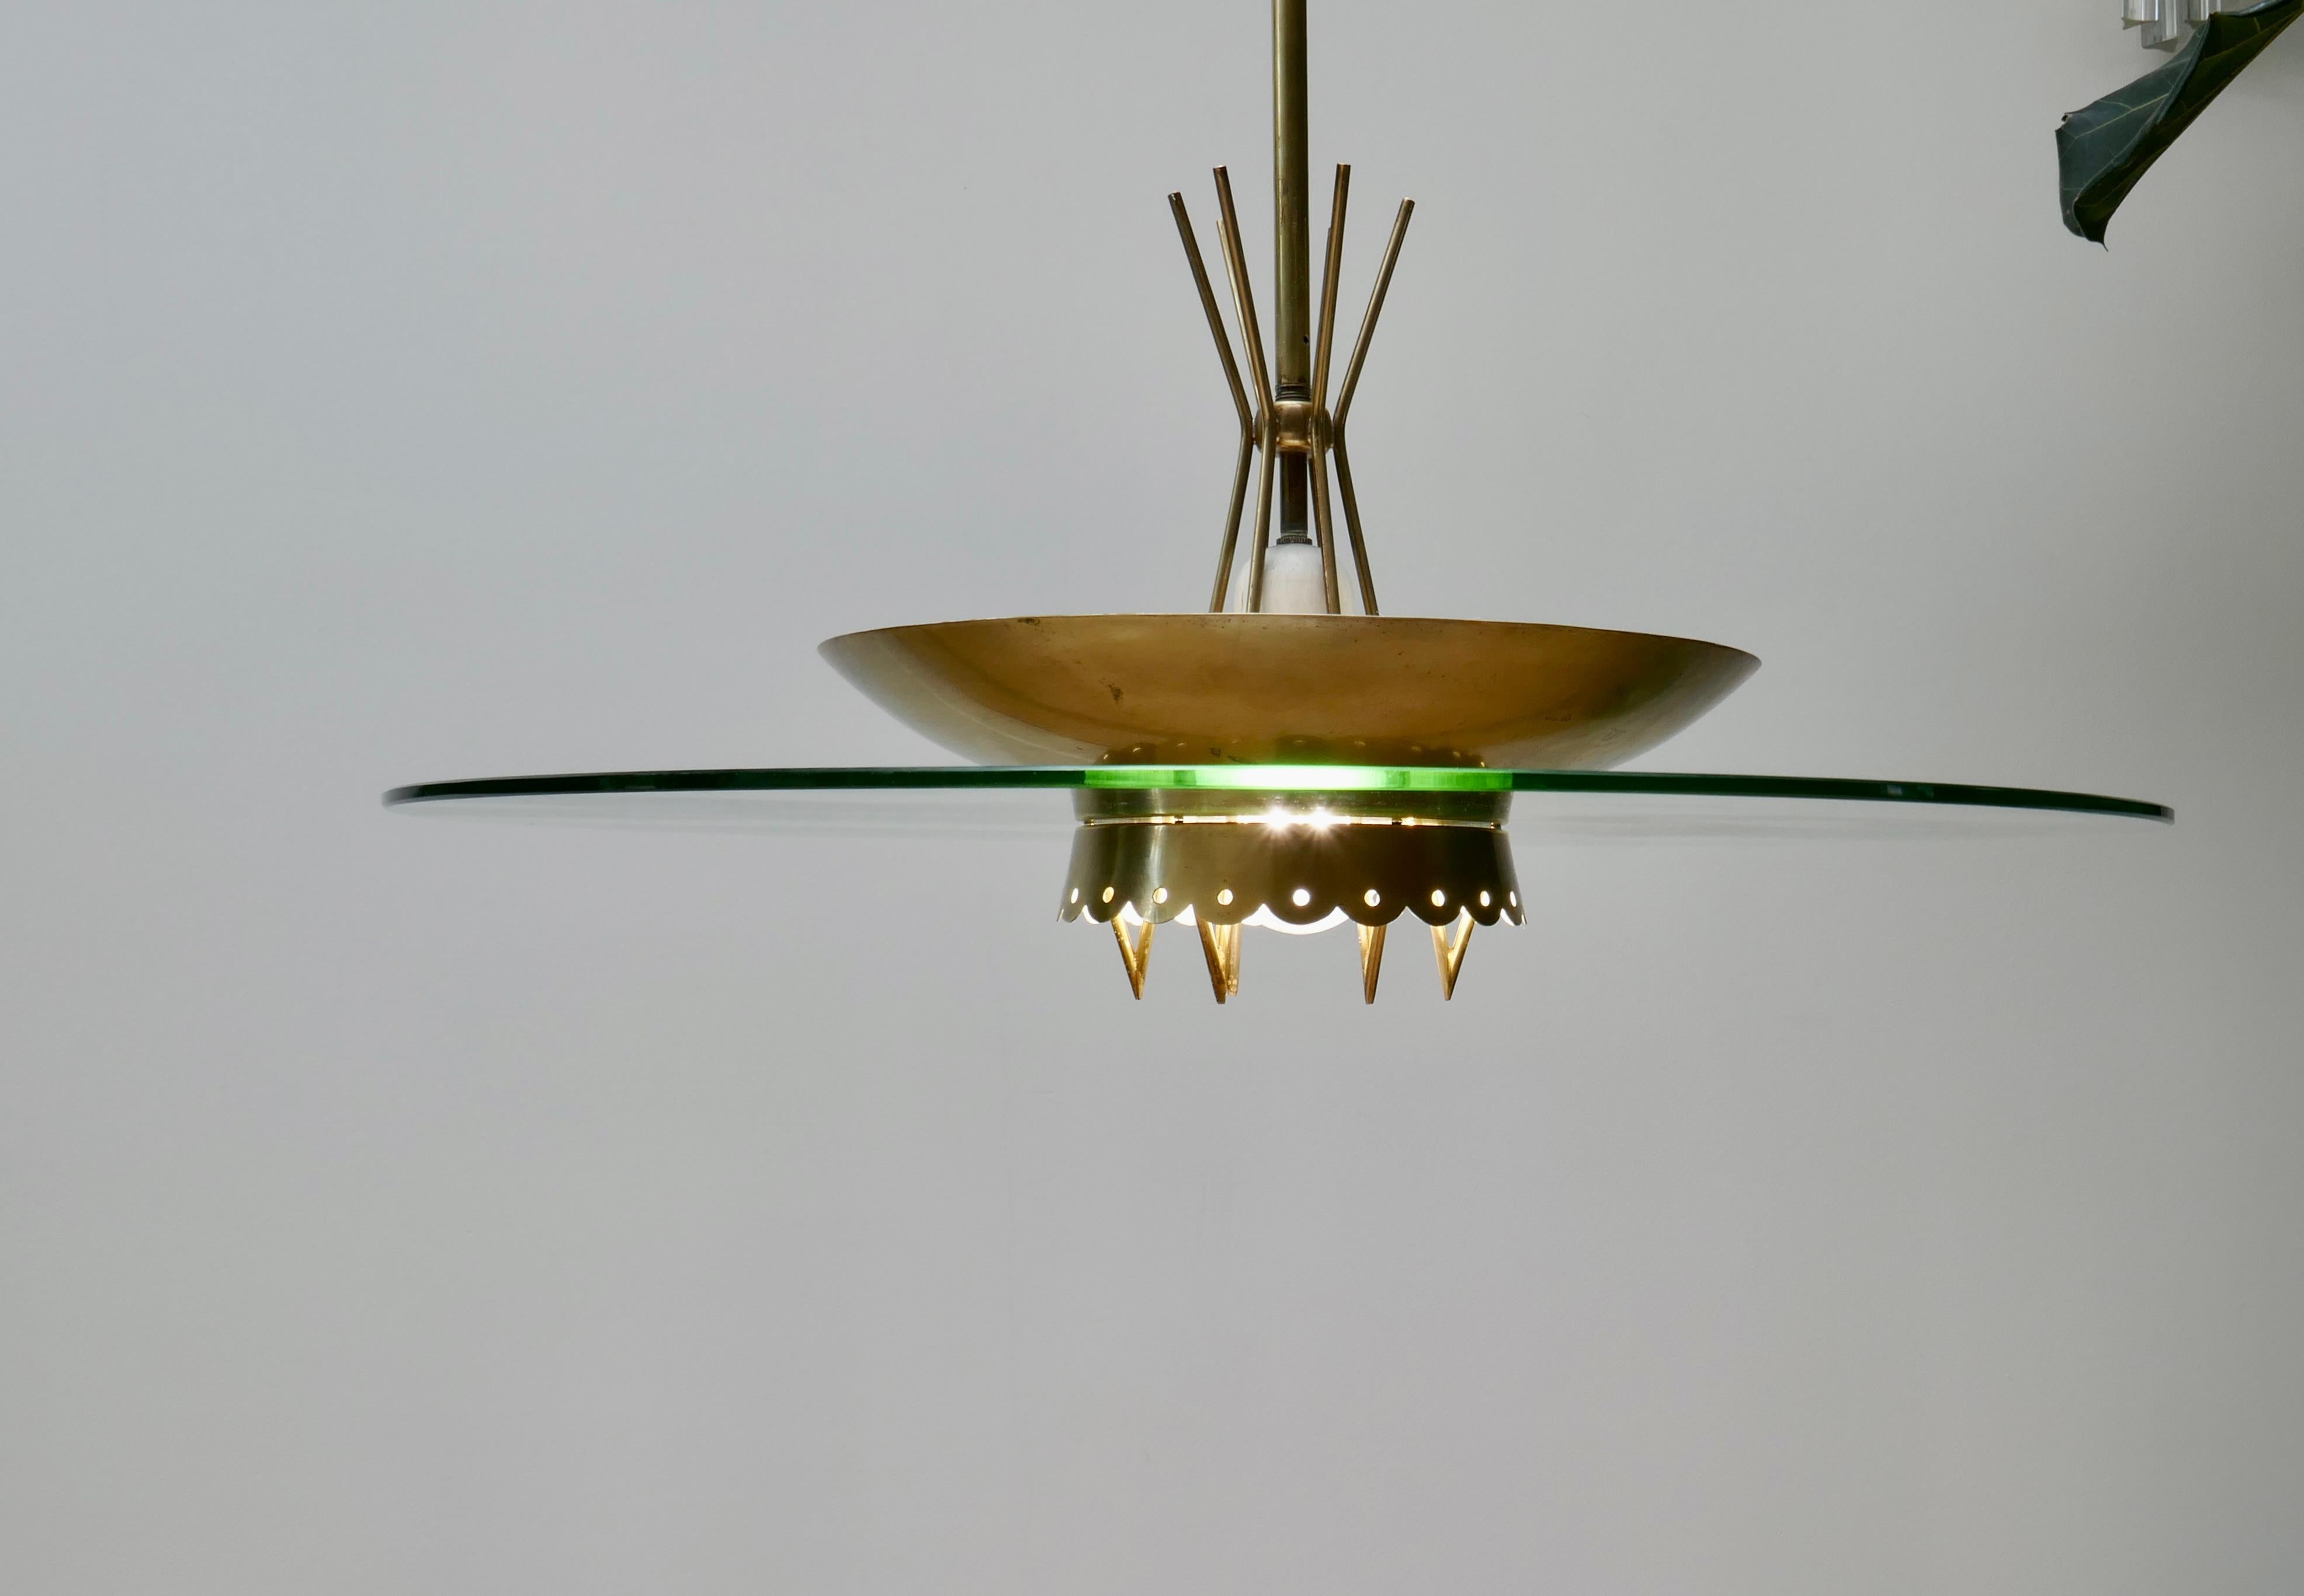 Italian Glass and Brass Saucer Chandelier, 1950s For Sale 3